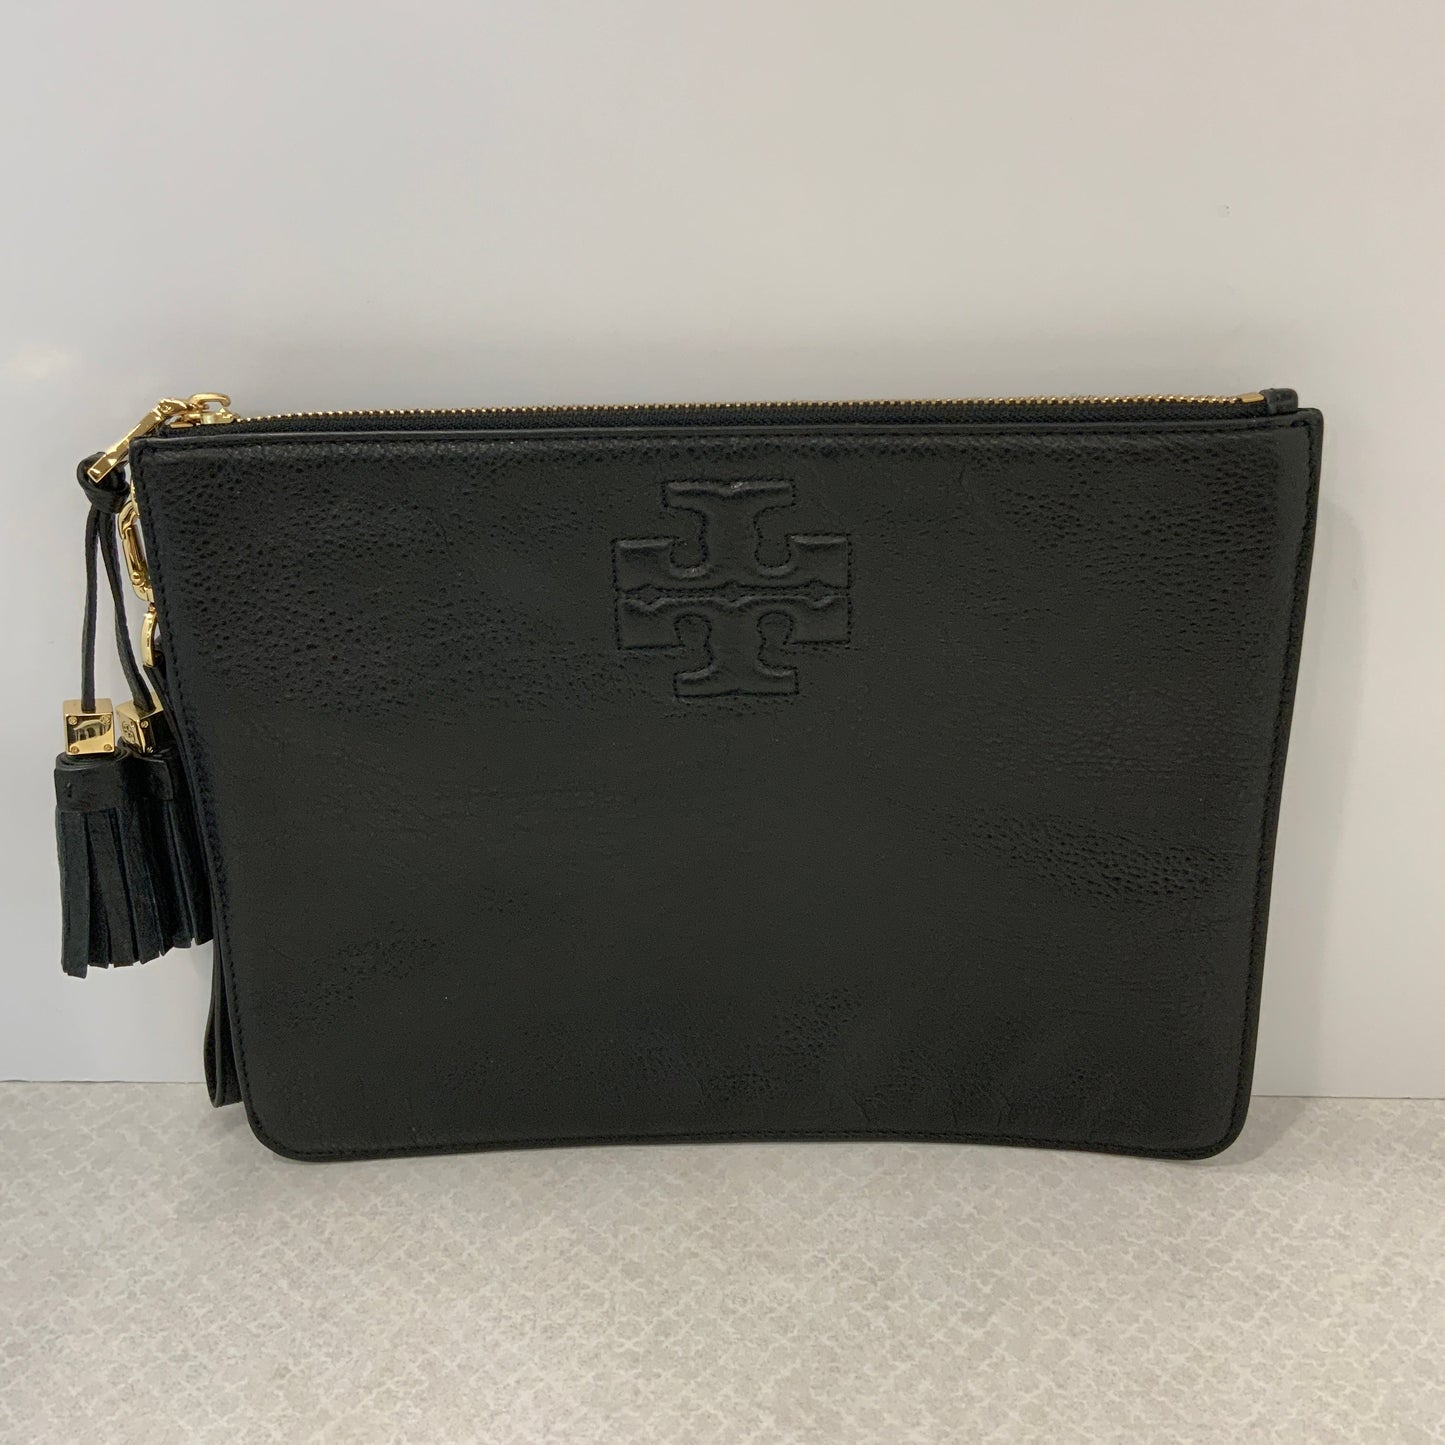 Clutch Tory Burch, Size Large